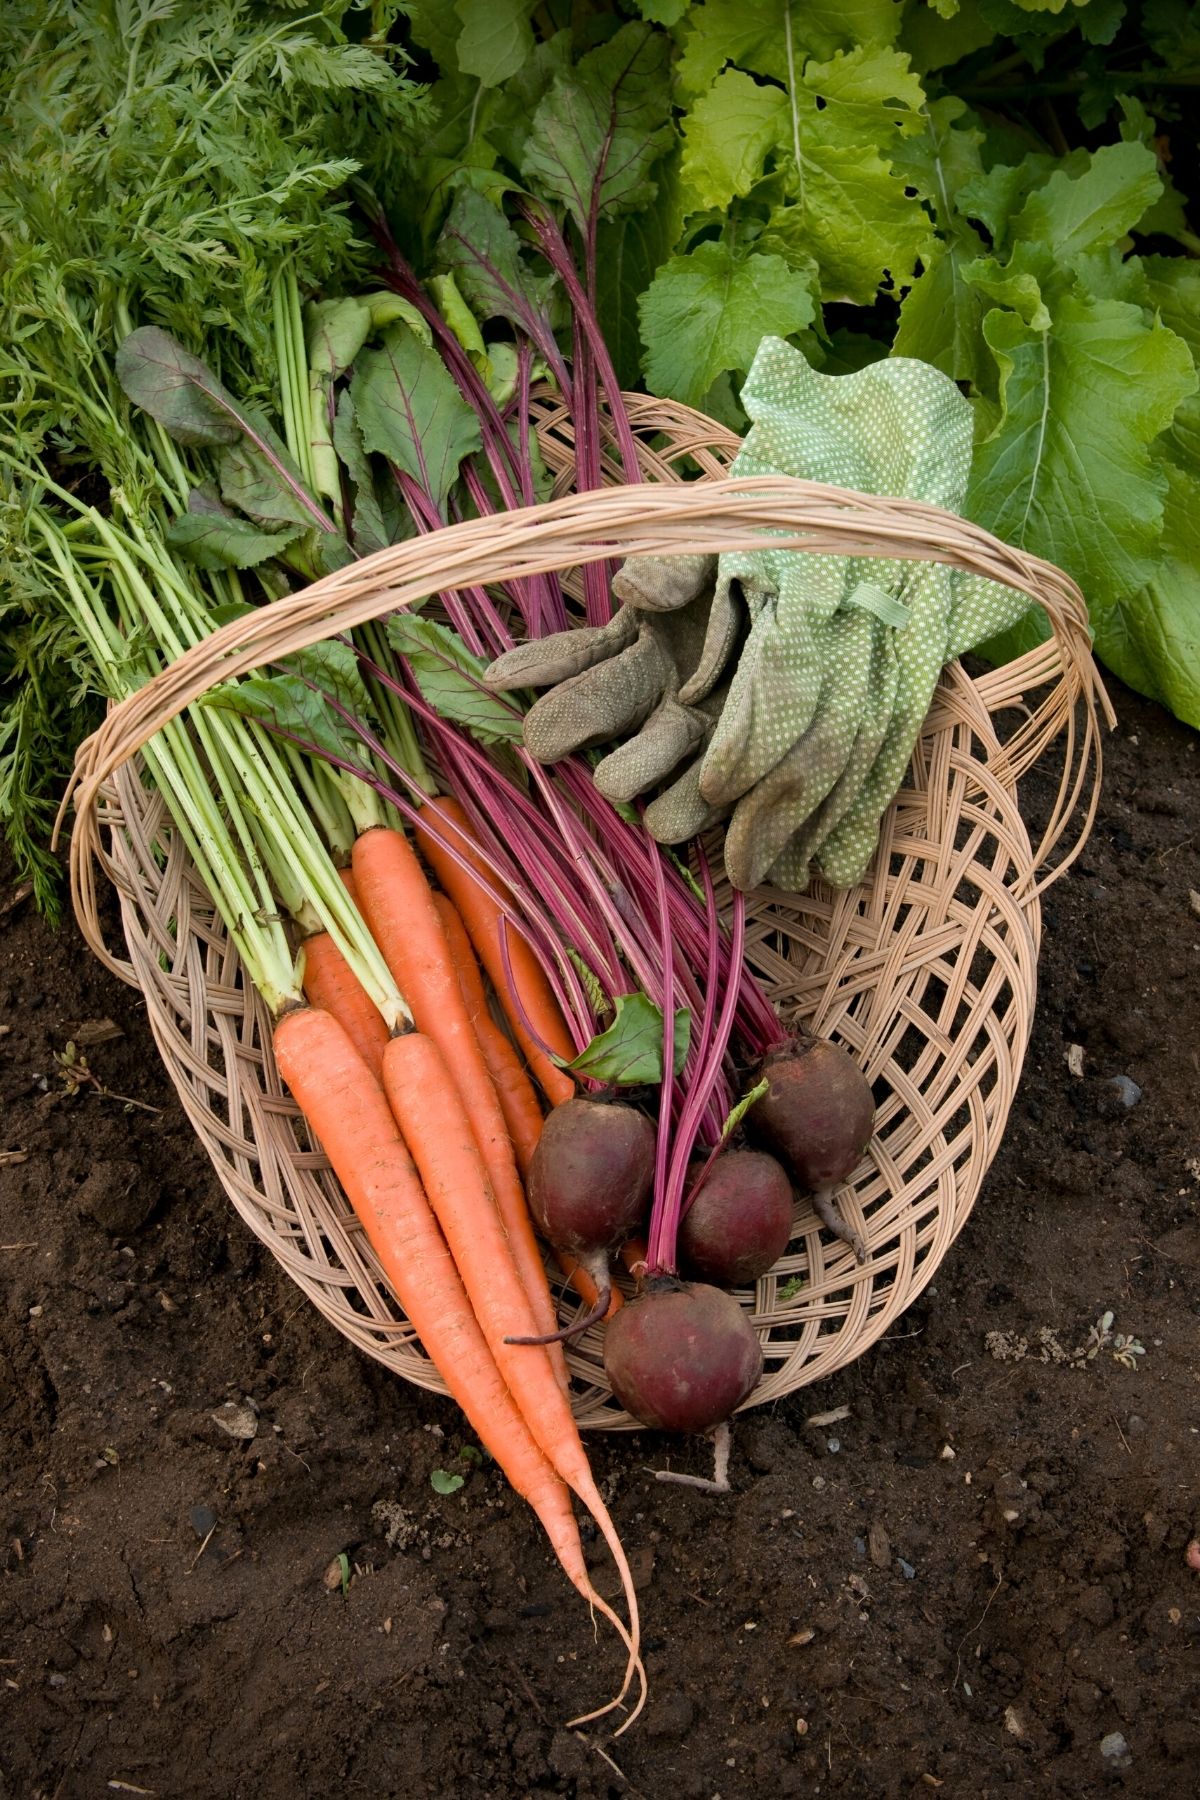 carrots and beets harvested from garden.